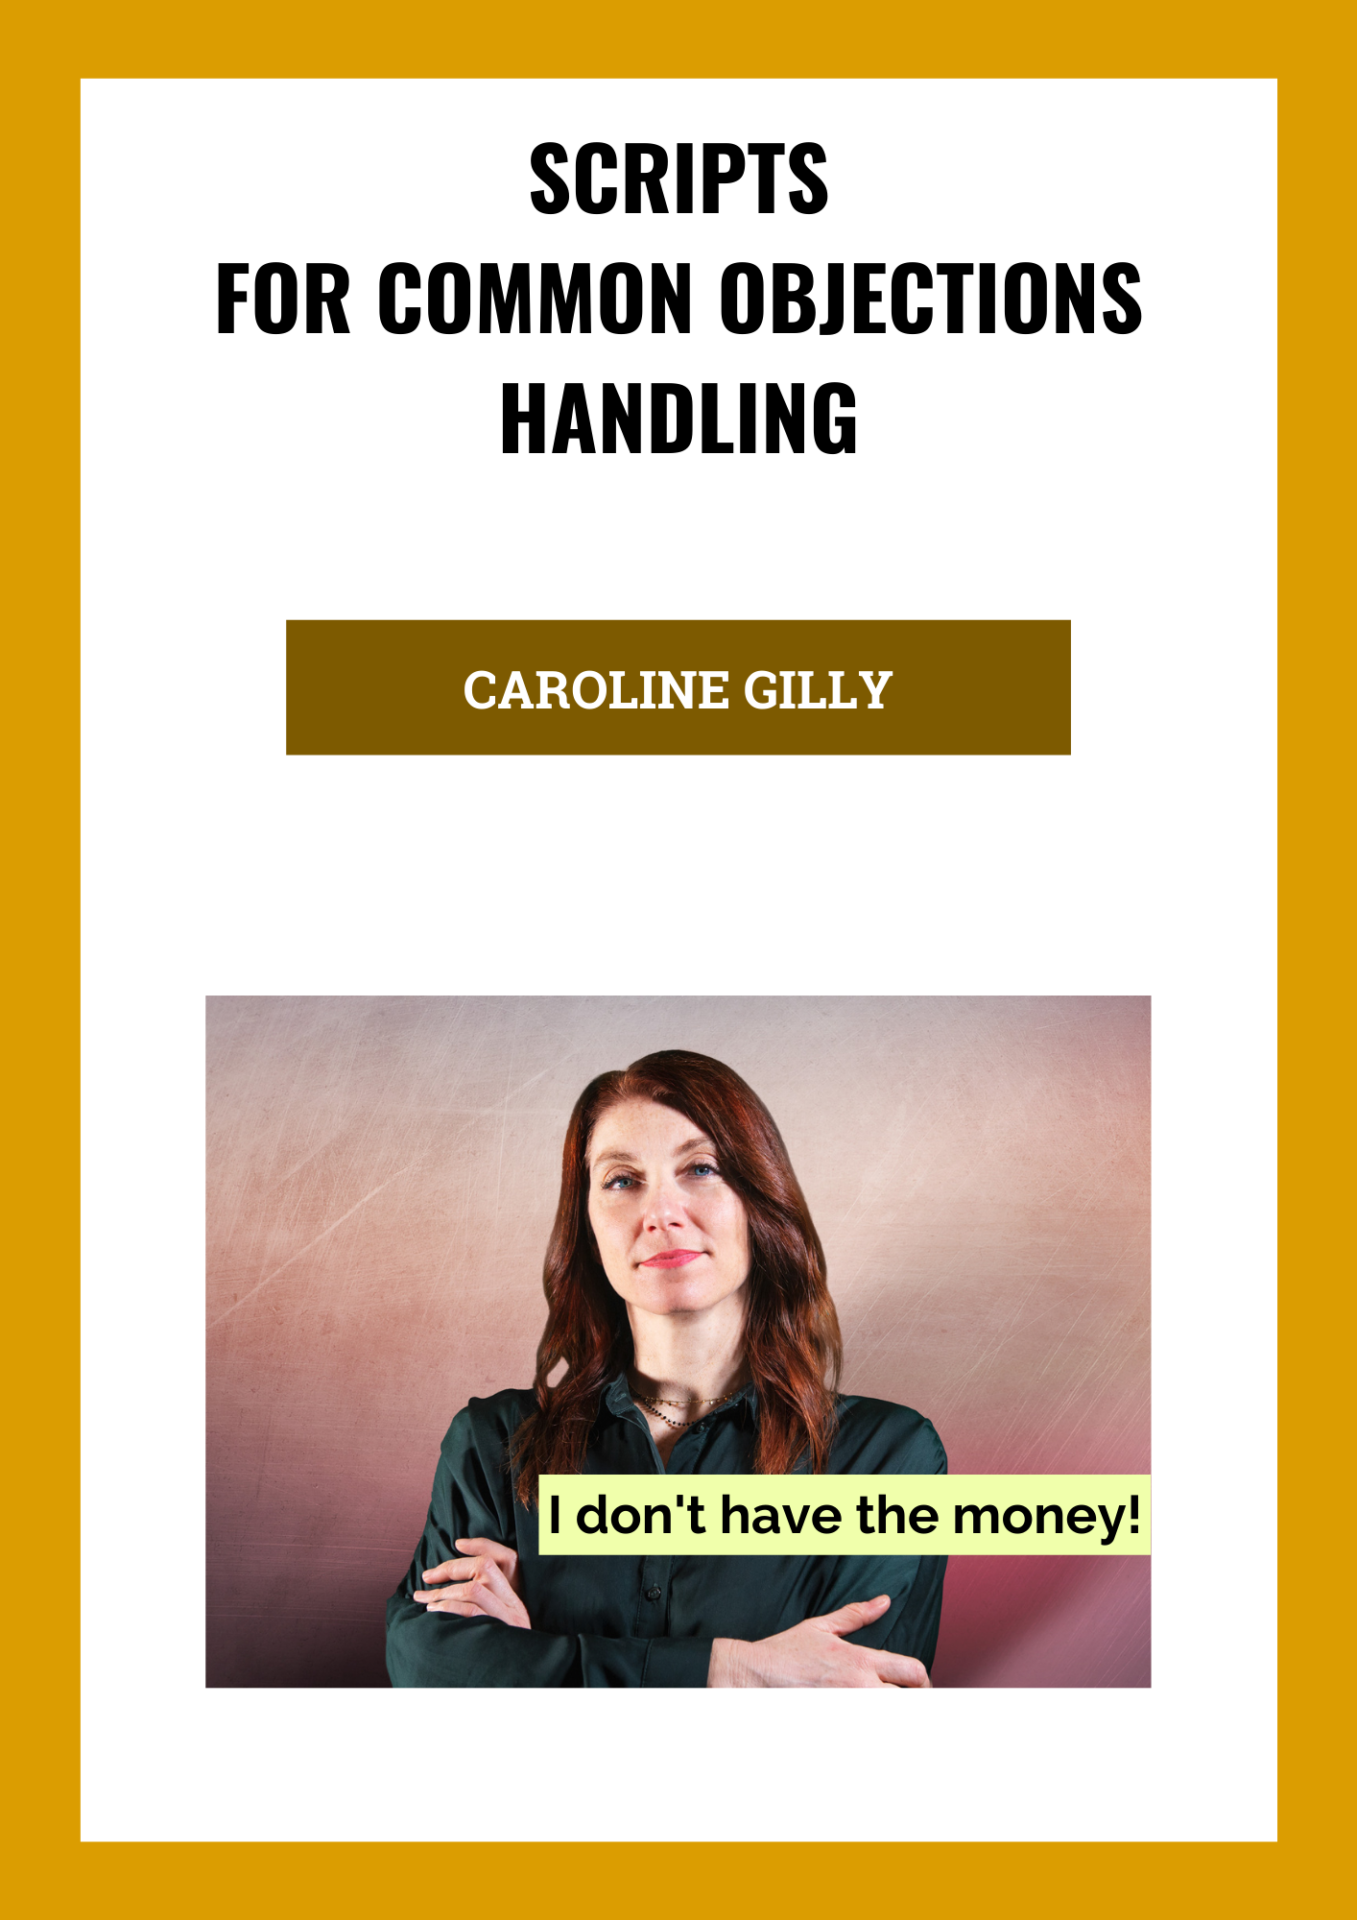 Scripts for Common Objections in Network Marketing